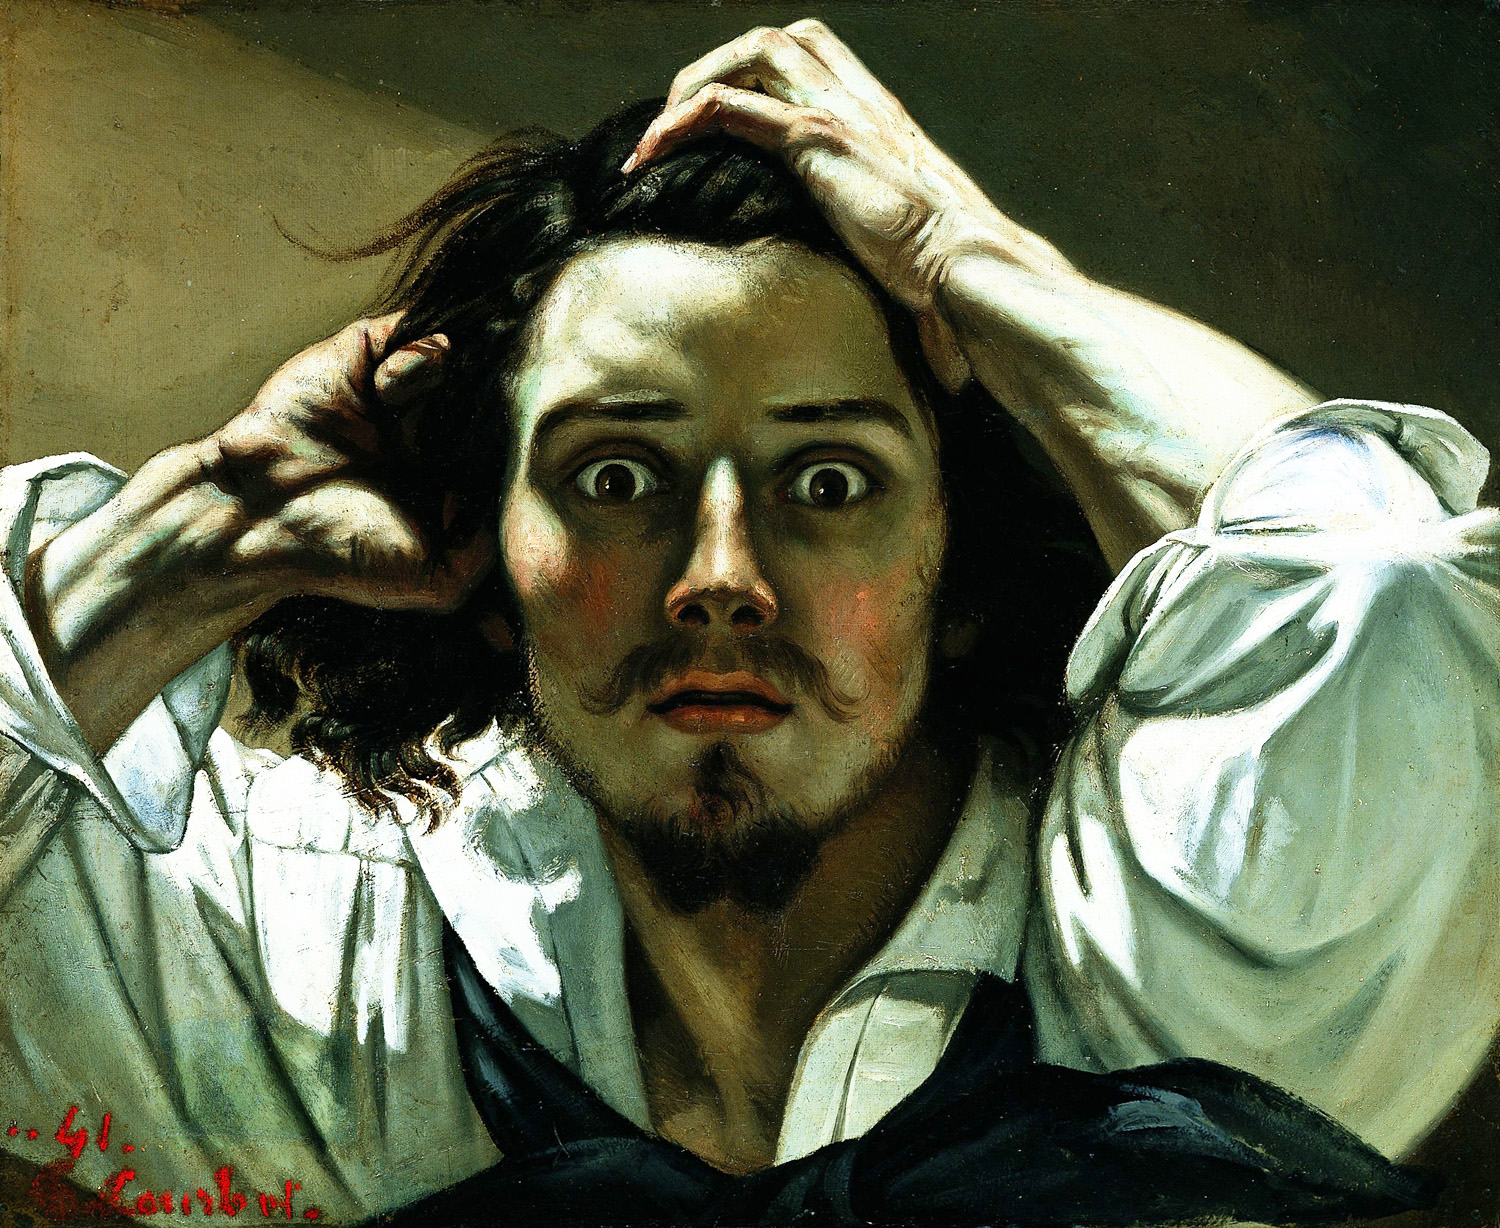 The Desperate Man by Gustave Courbet - 1845 - 45 × 55 cm private collection